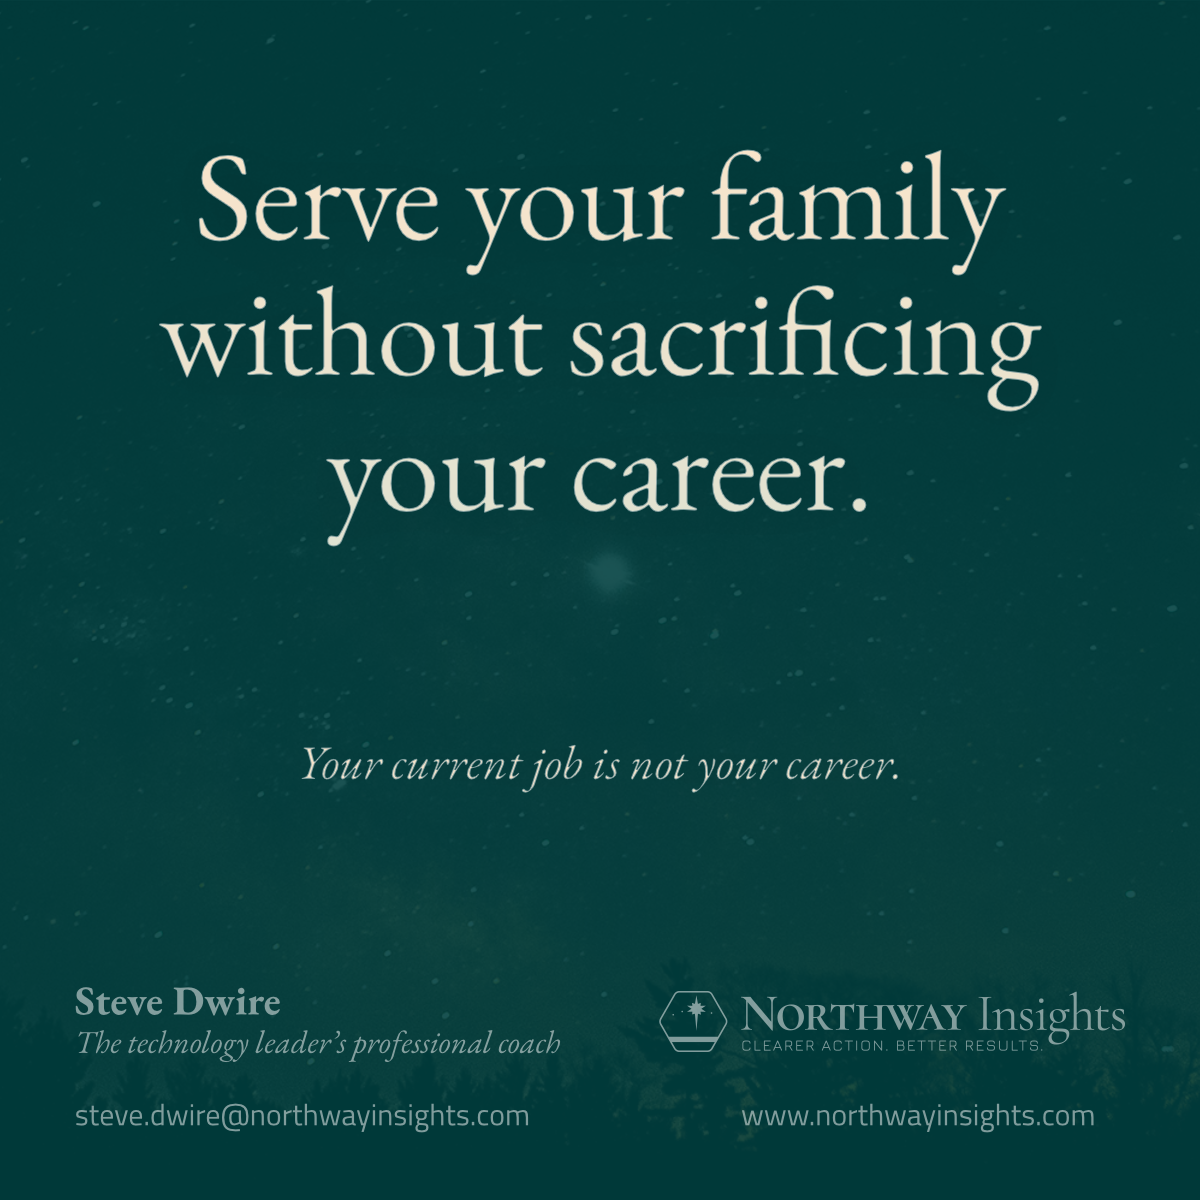 Serve your family without sacrificing your career. (Your current job is not your career.)